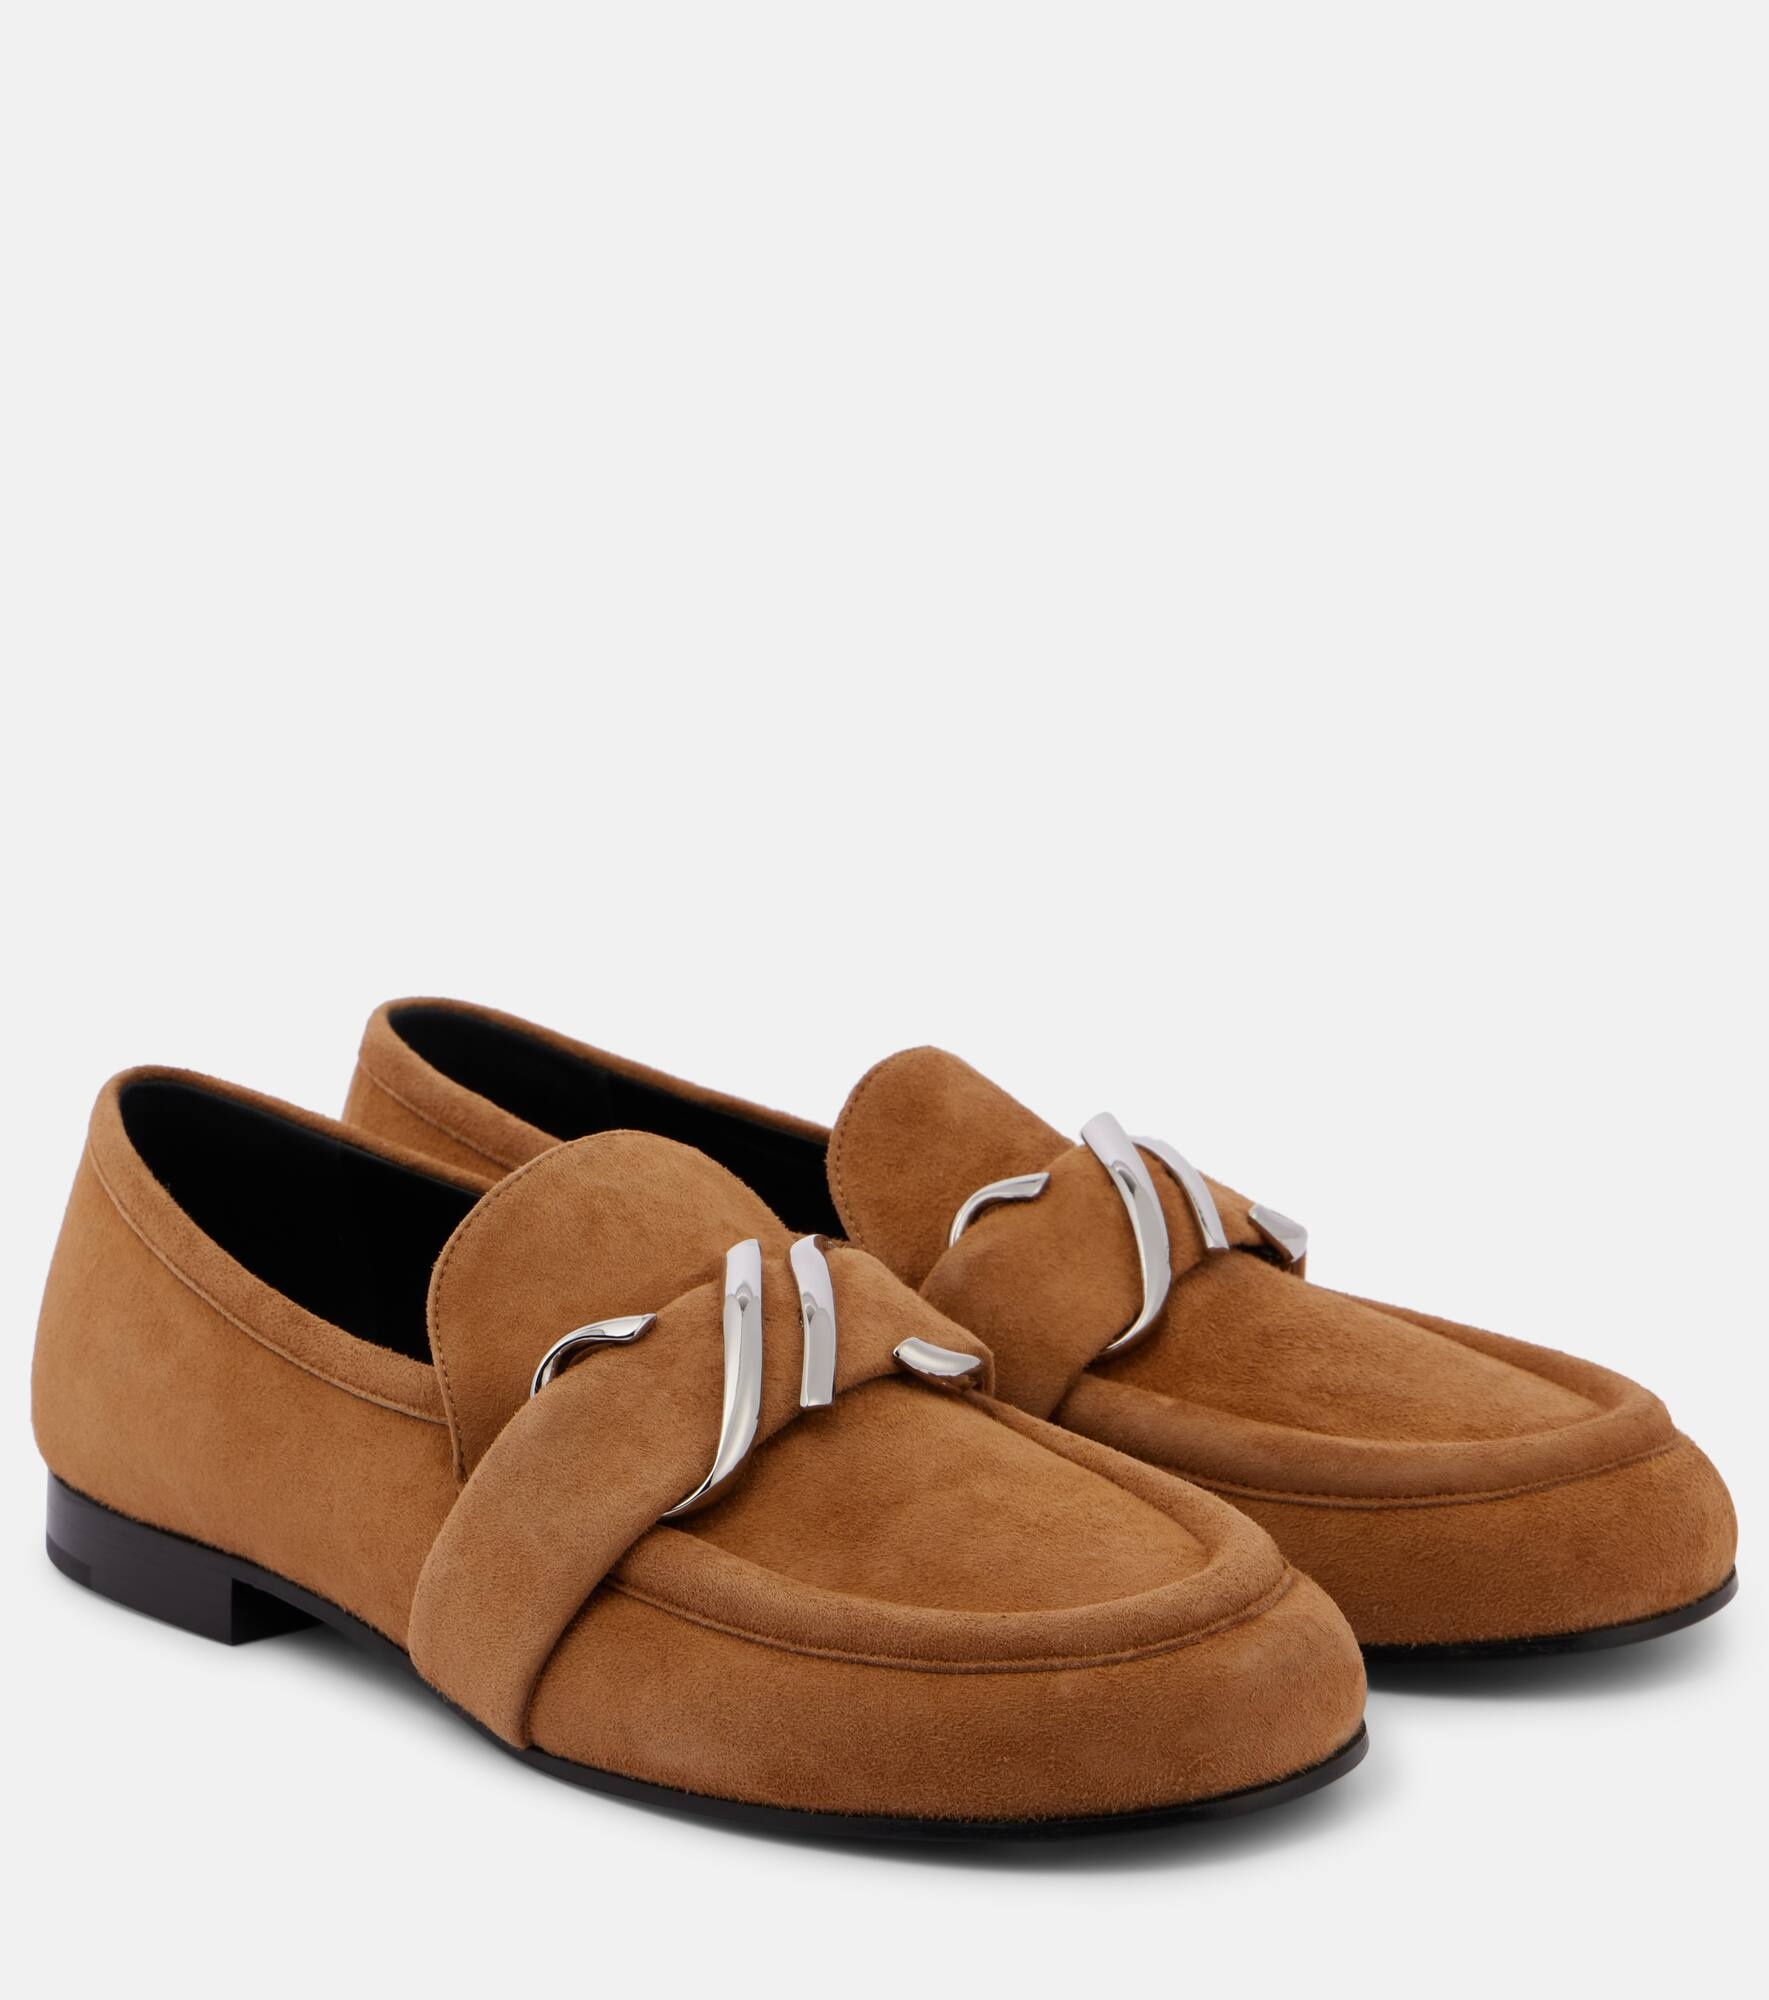 Monogram suede loafers - 1